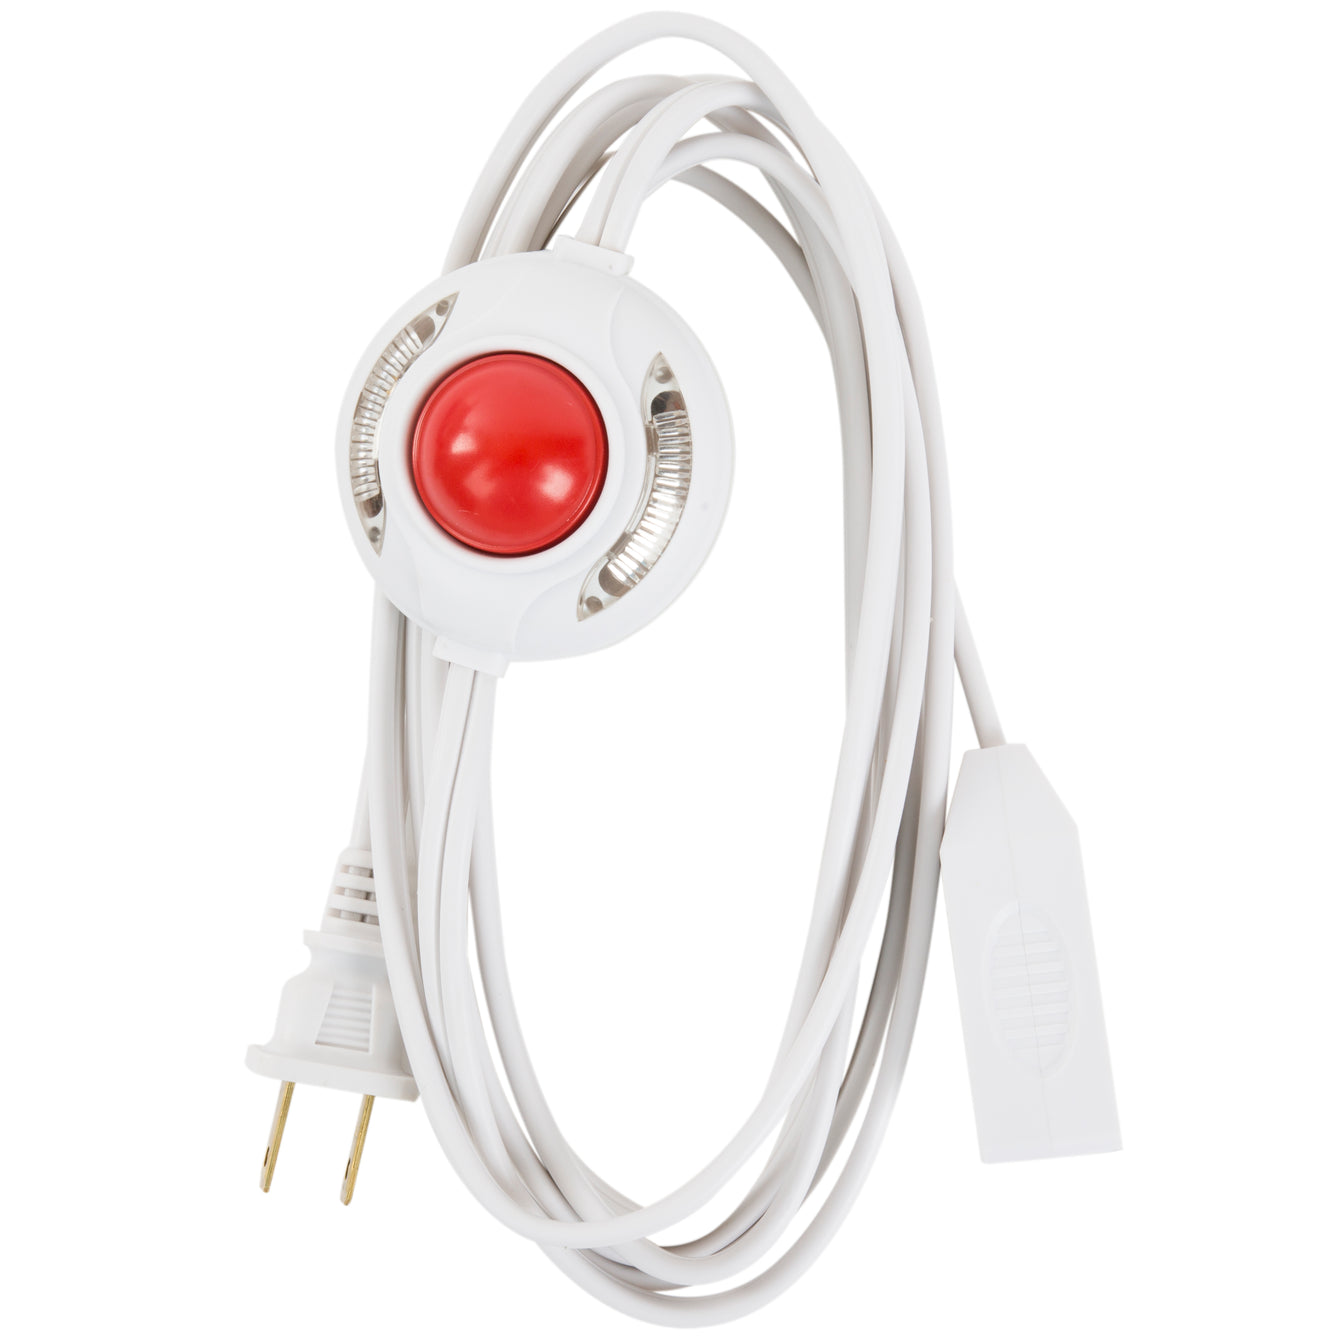 Otimo Lighted Foot Switch with 9 Foot Power Cord -- 3-Outlet Extension Cord -- White Extension Cable